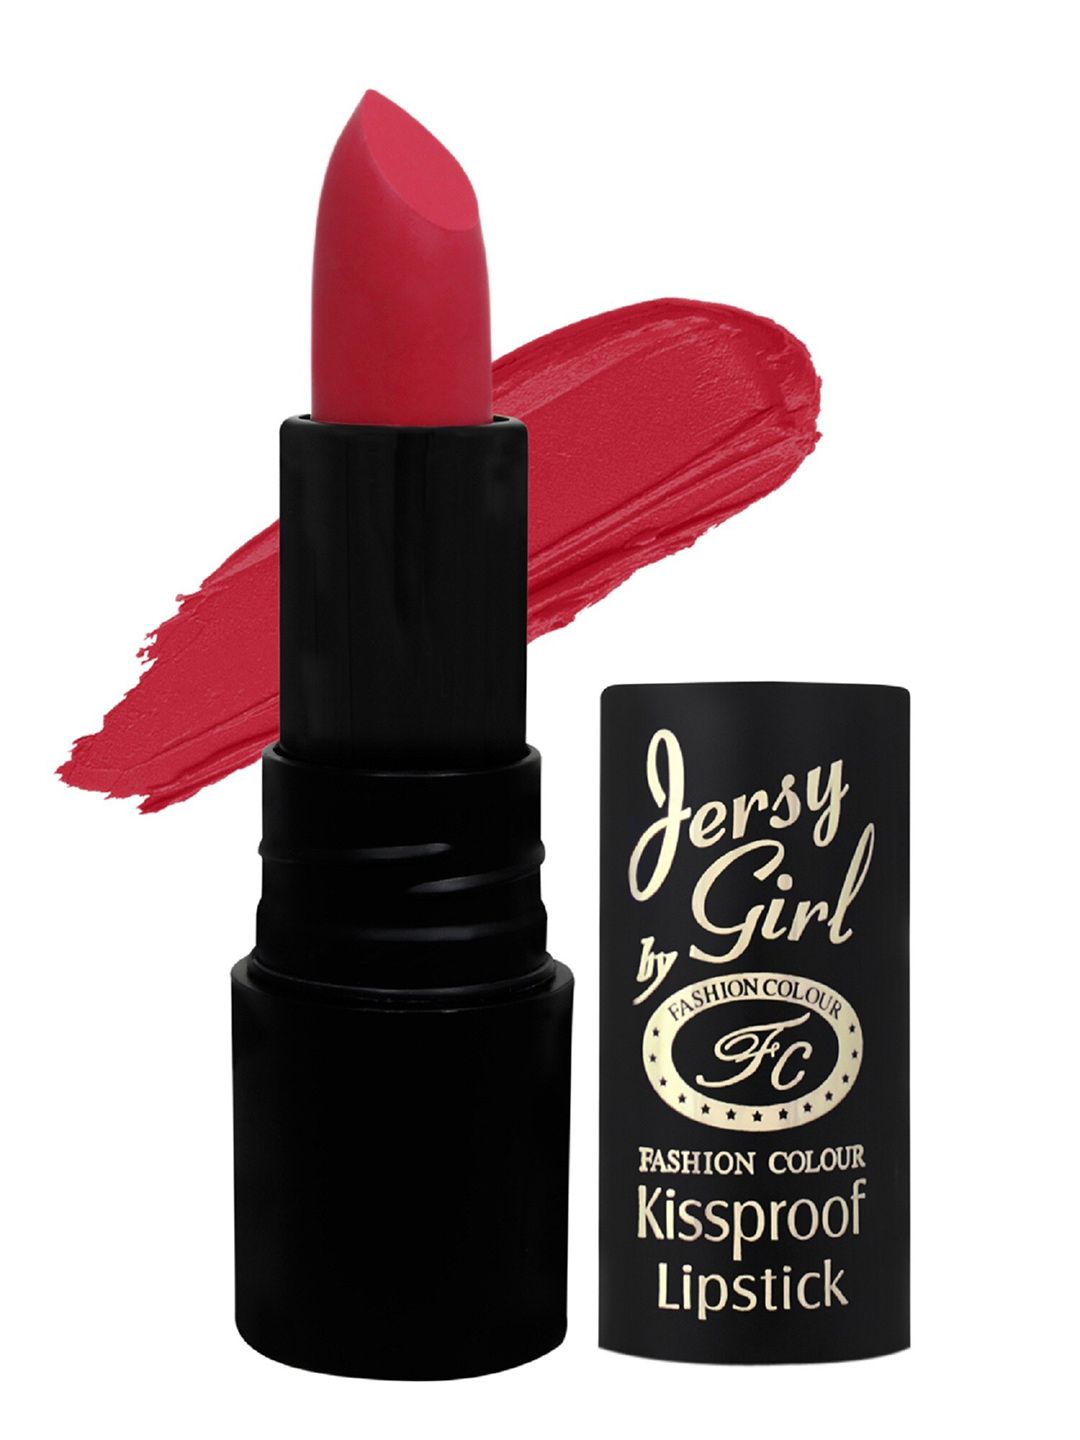 Fashion Colour Women Jersy Girl Kiss Proof Lipstick - Ageta Red 18  3.8 gm Price in India